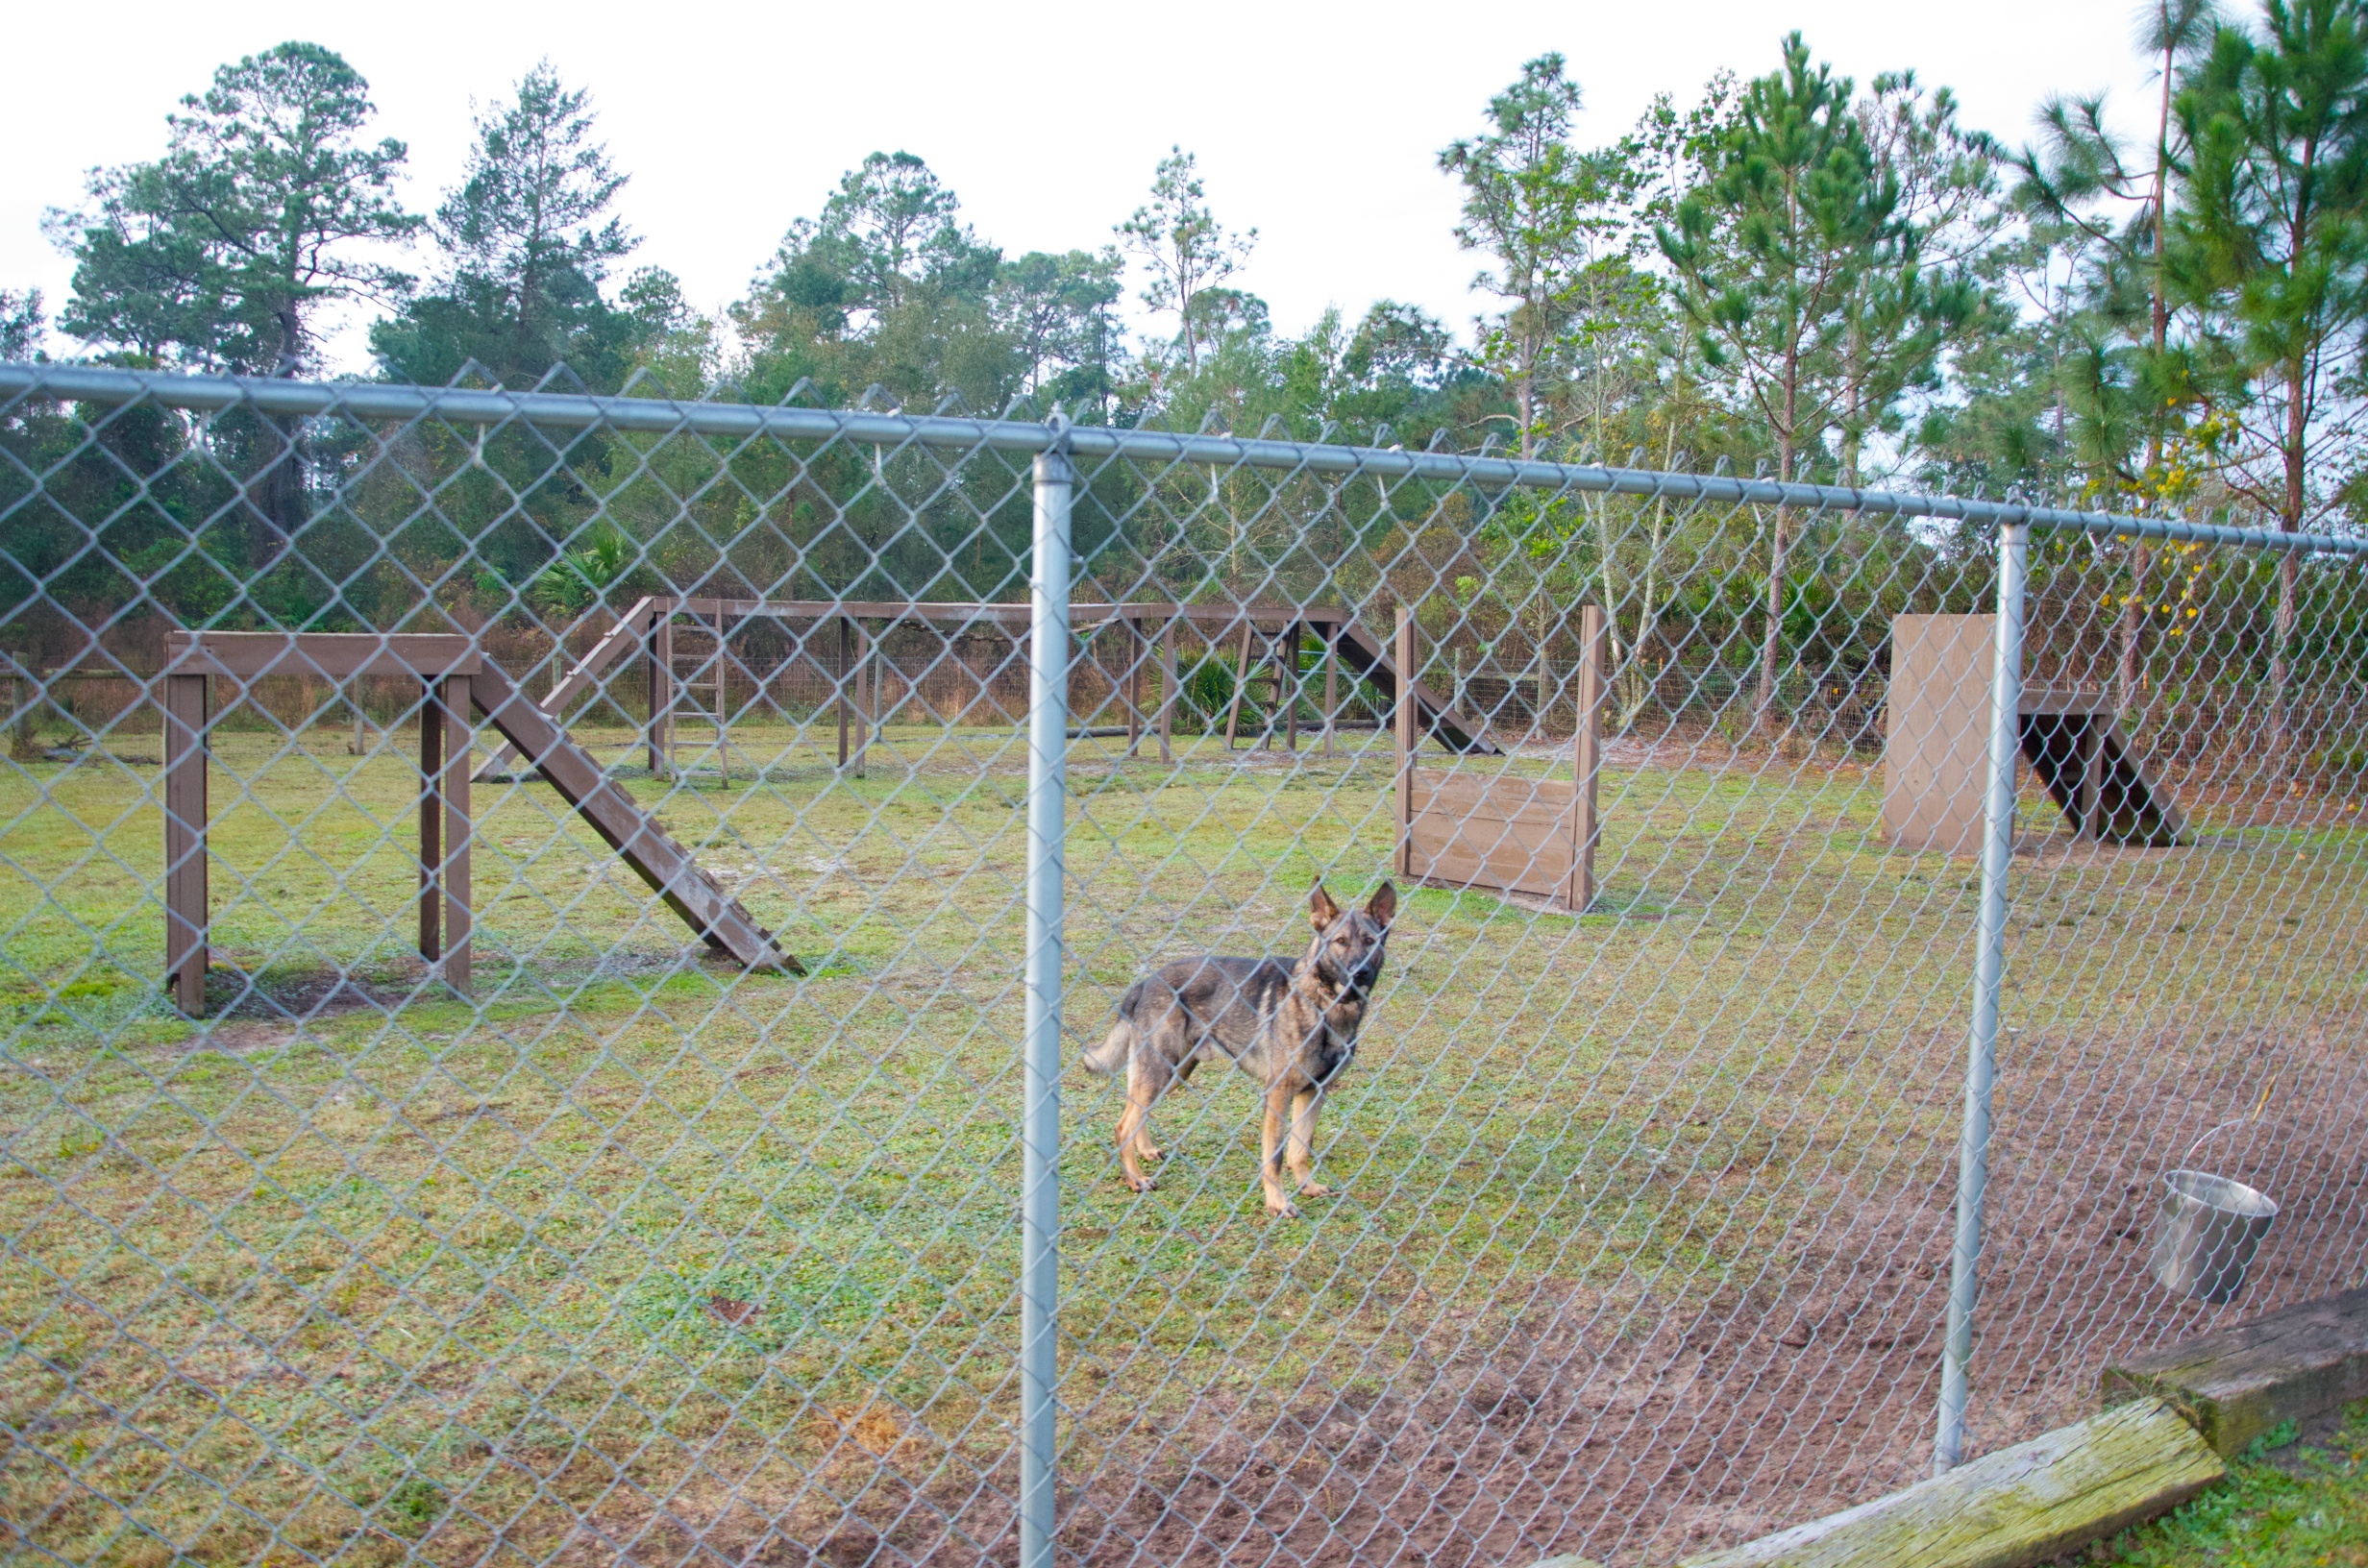 Our facility has a great K9 obstacle training course